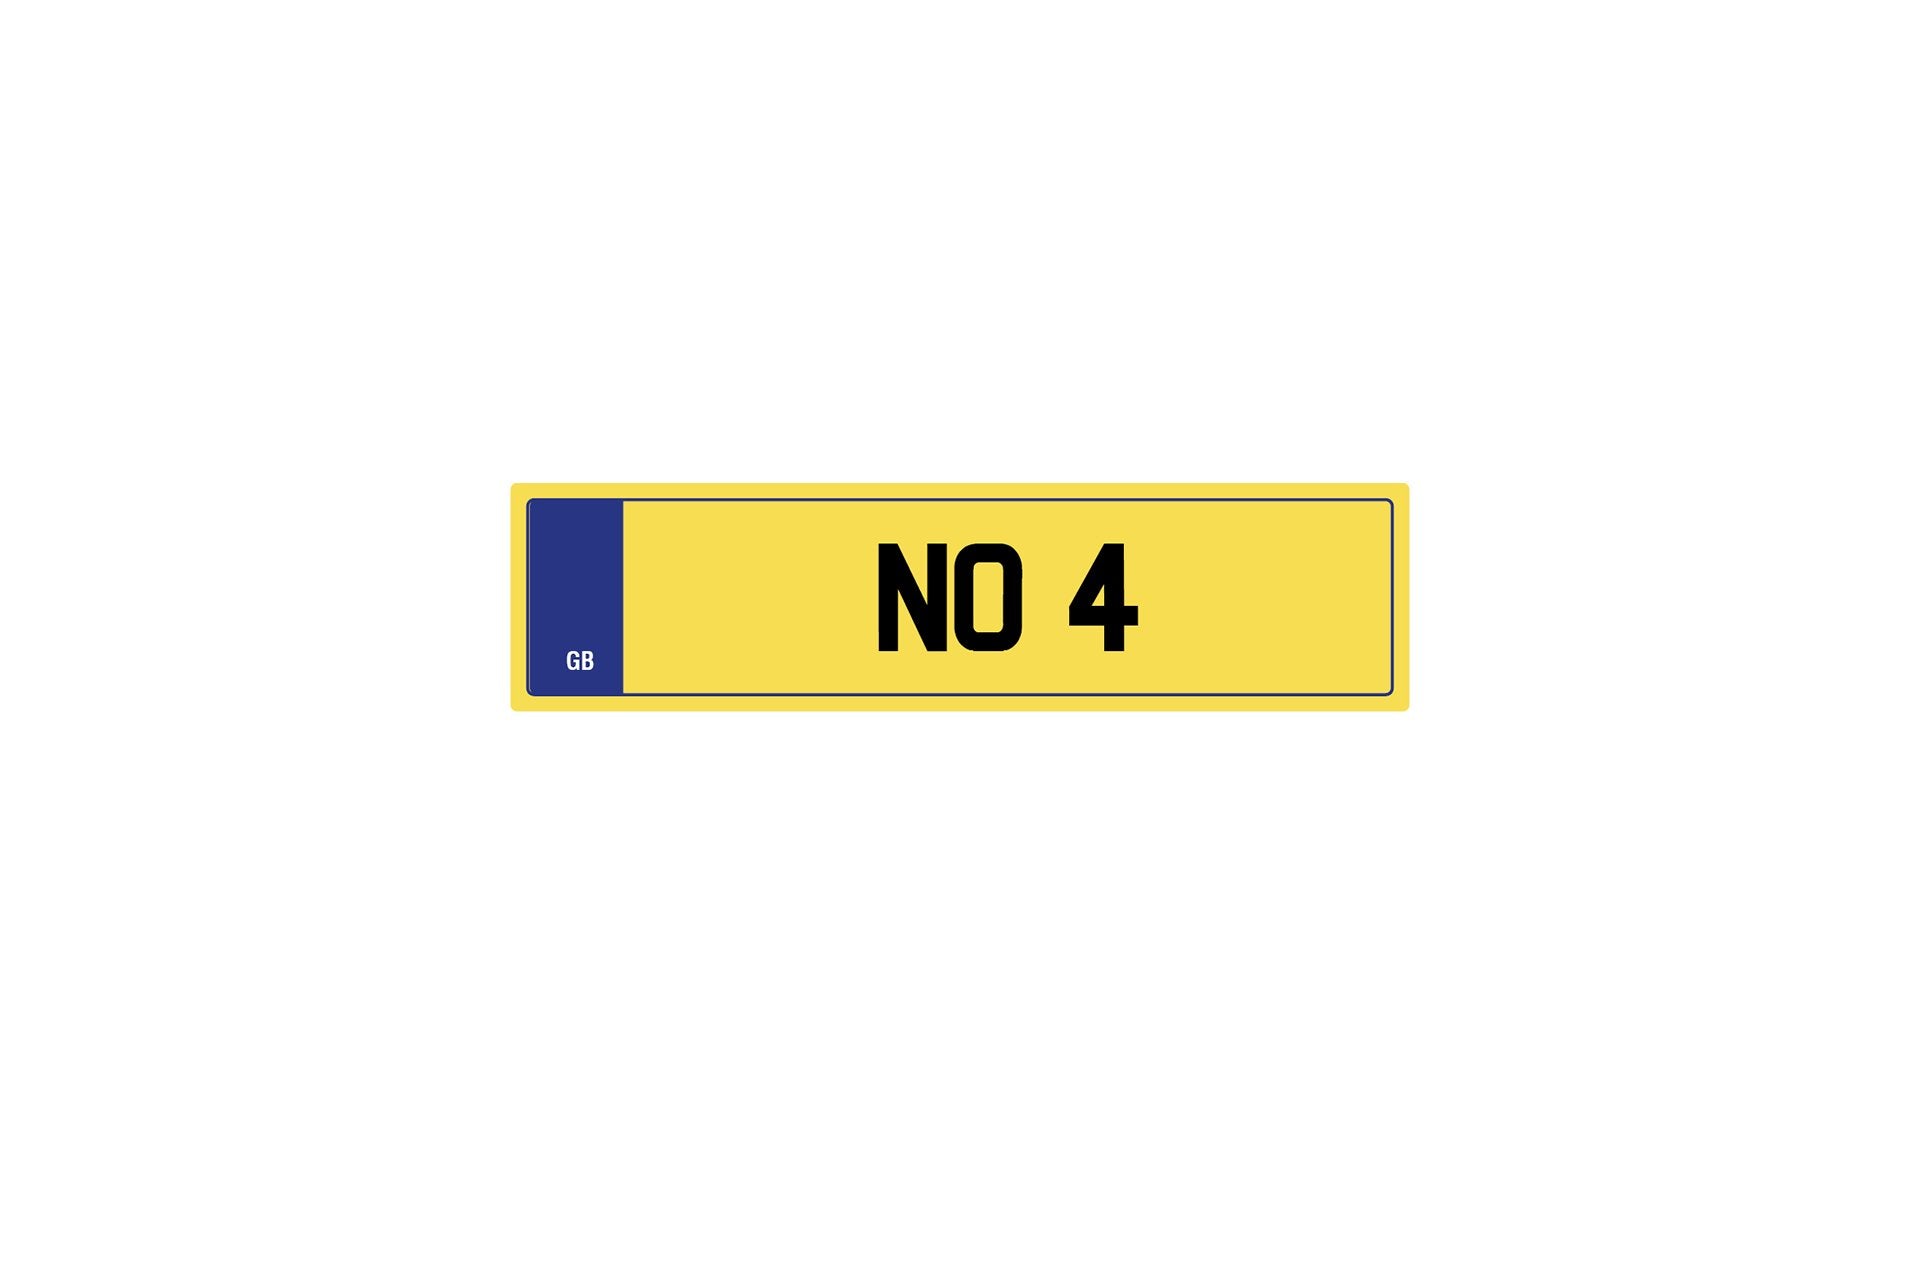 Private Plate No 4 by Kahn - Image 281